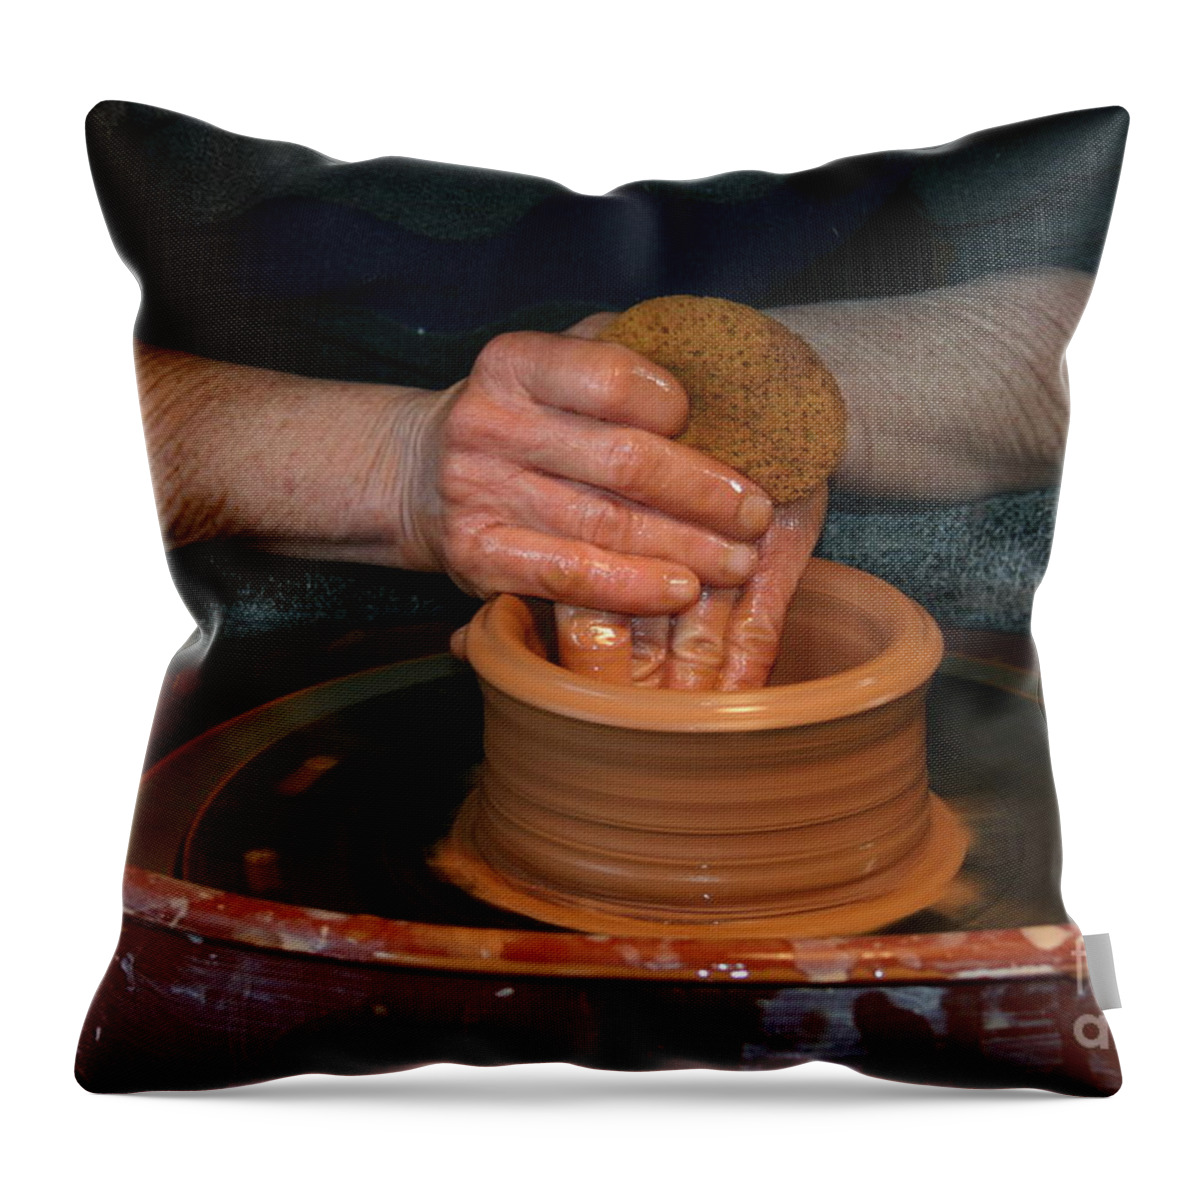 Pottery Throw Pillow featuring the photograph A Potter's Hands by Marie Neder